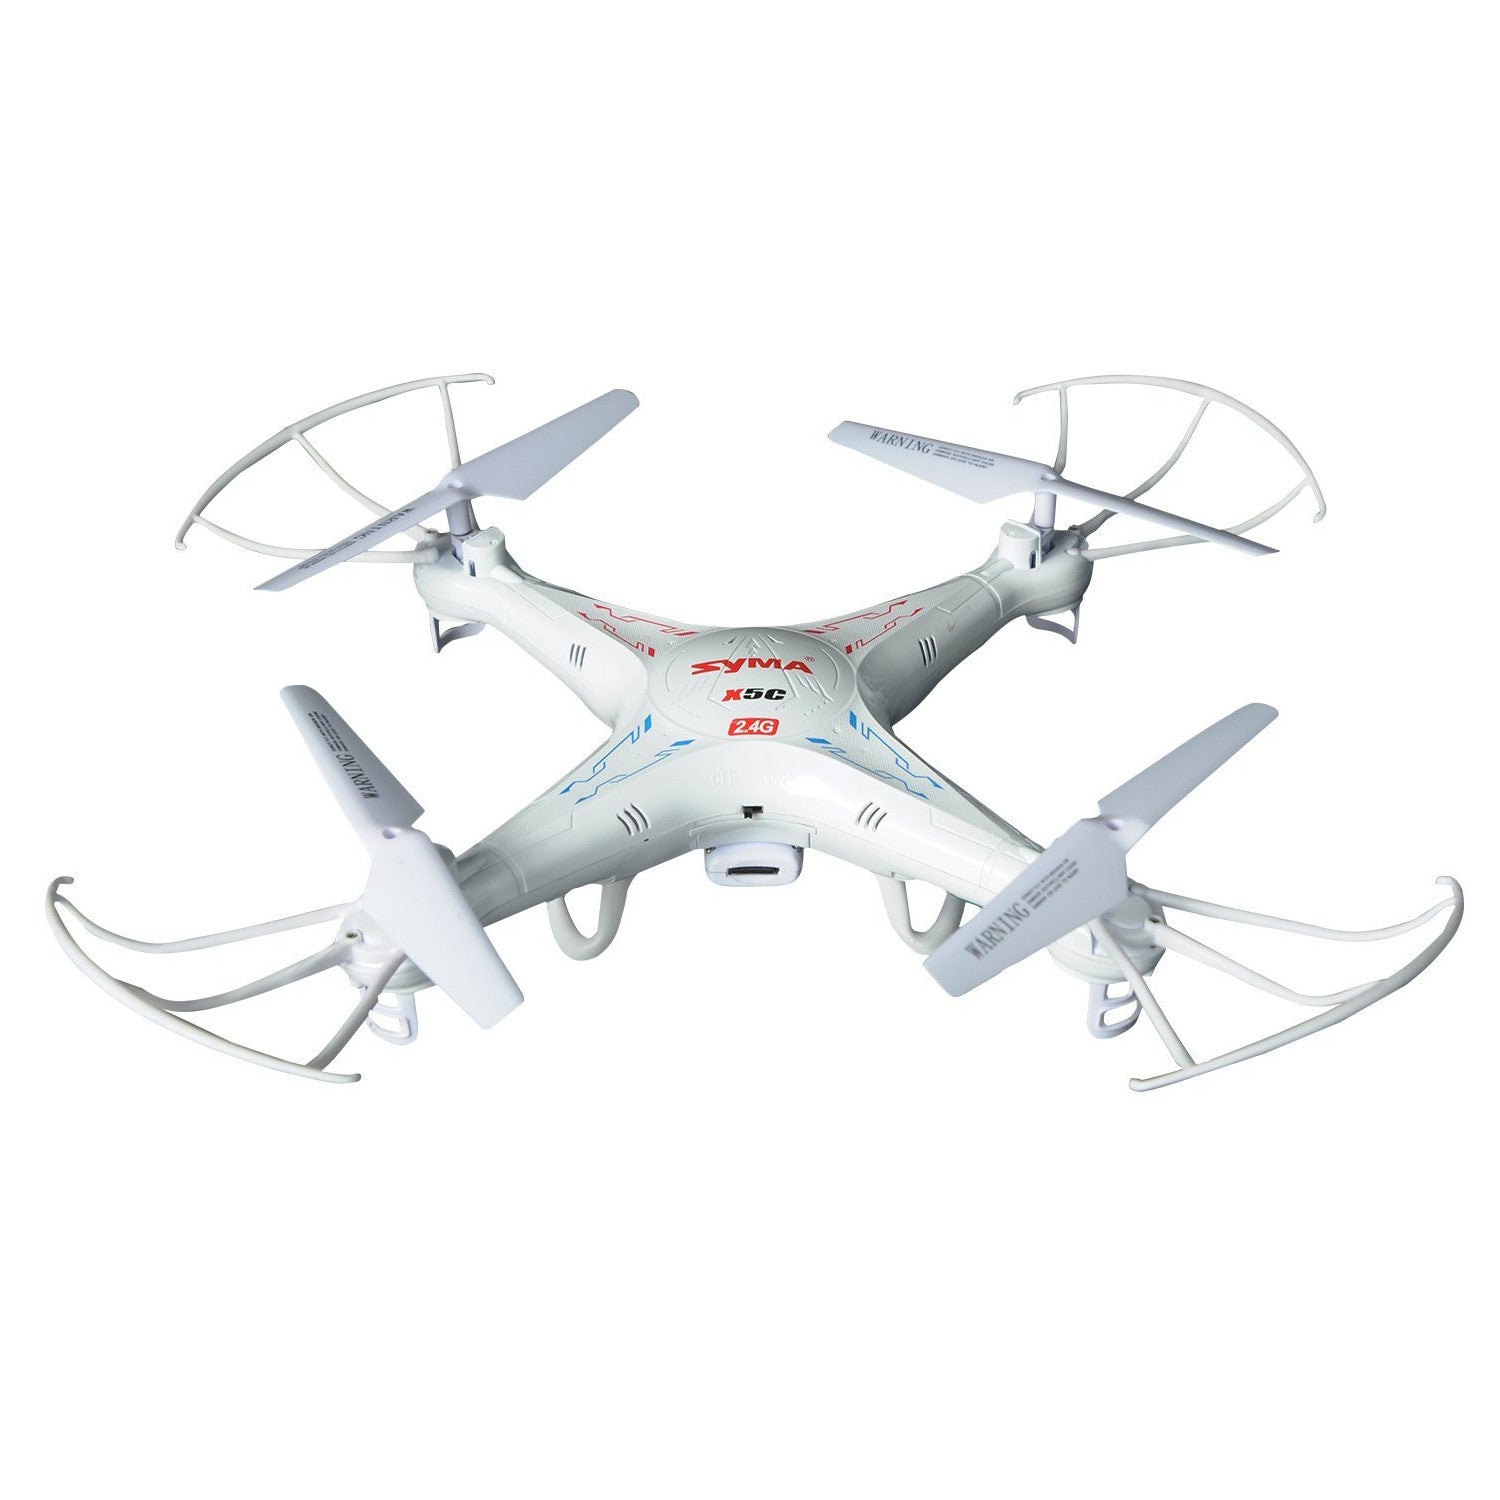 SYMA X5C-1 Explorers 2.4G 4CH 6-Axis Gyro RC Quadcopter With HD Camera